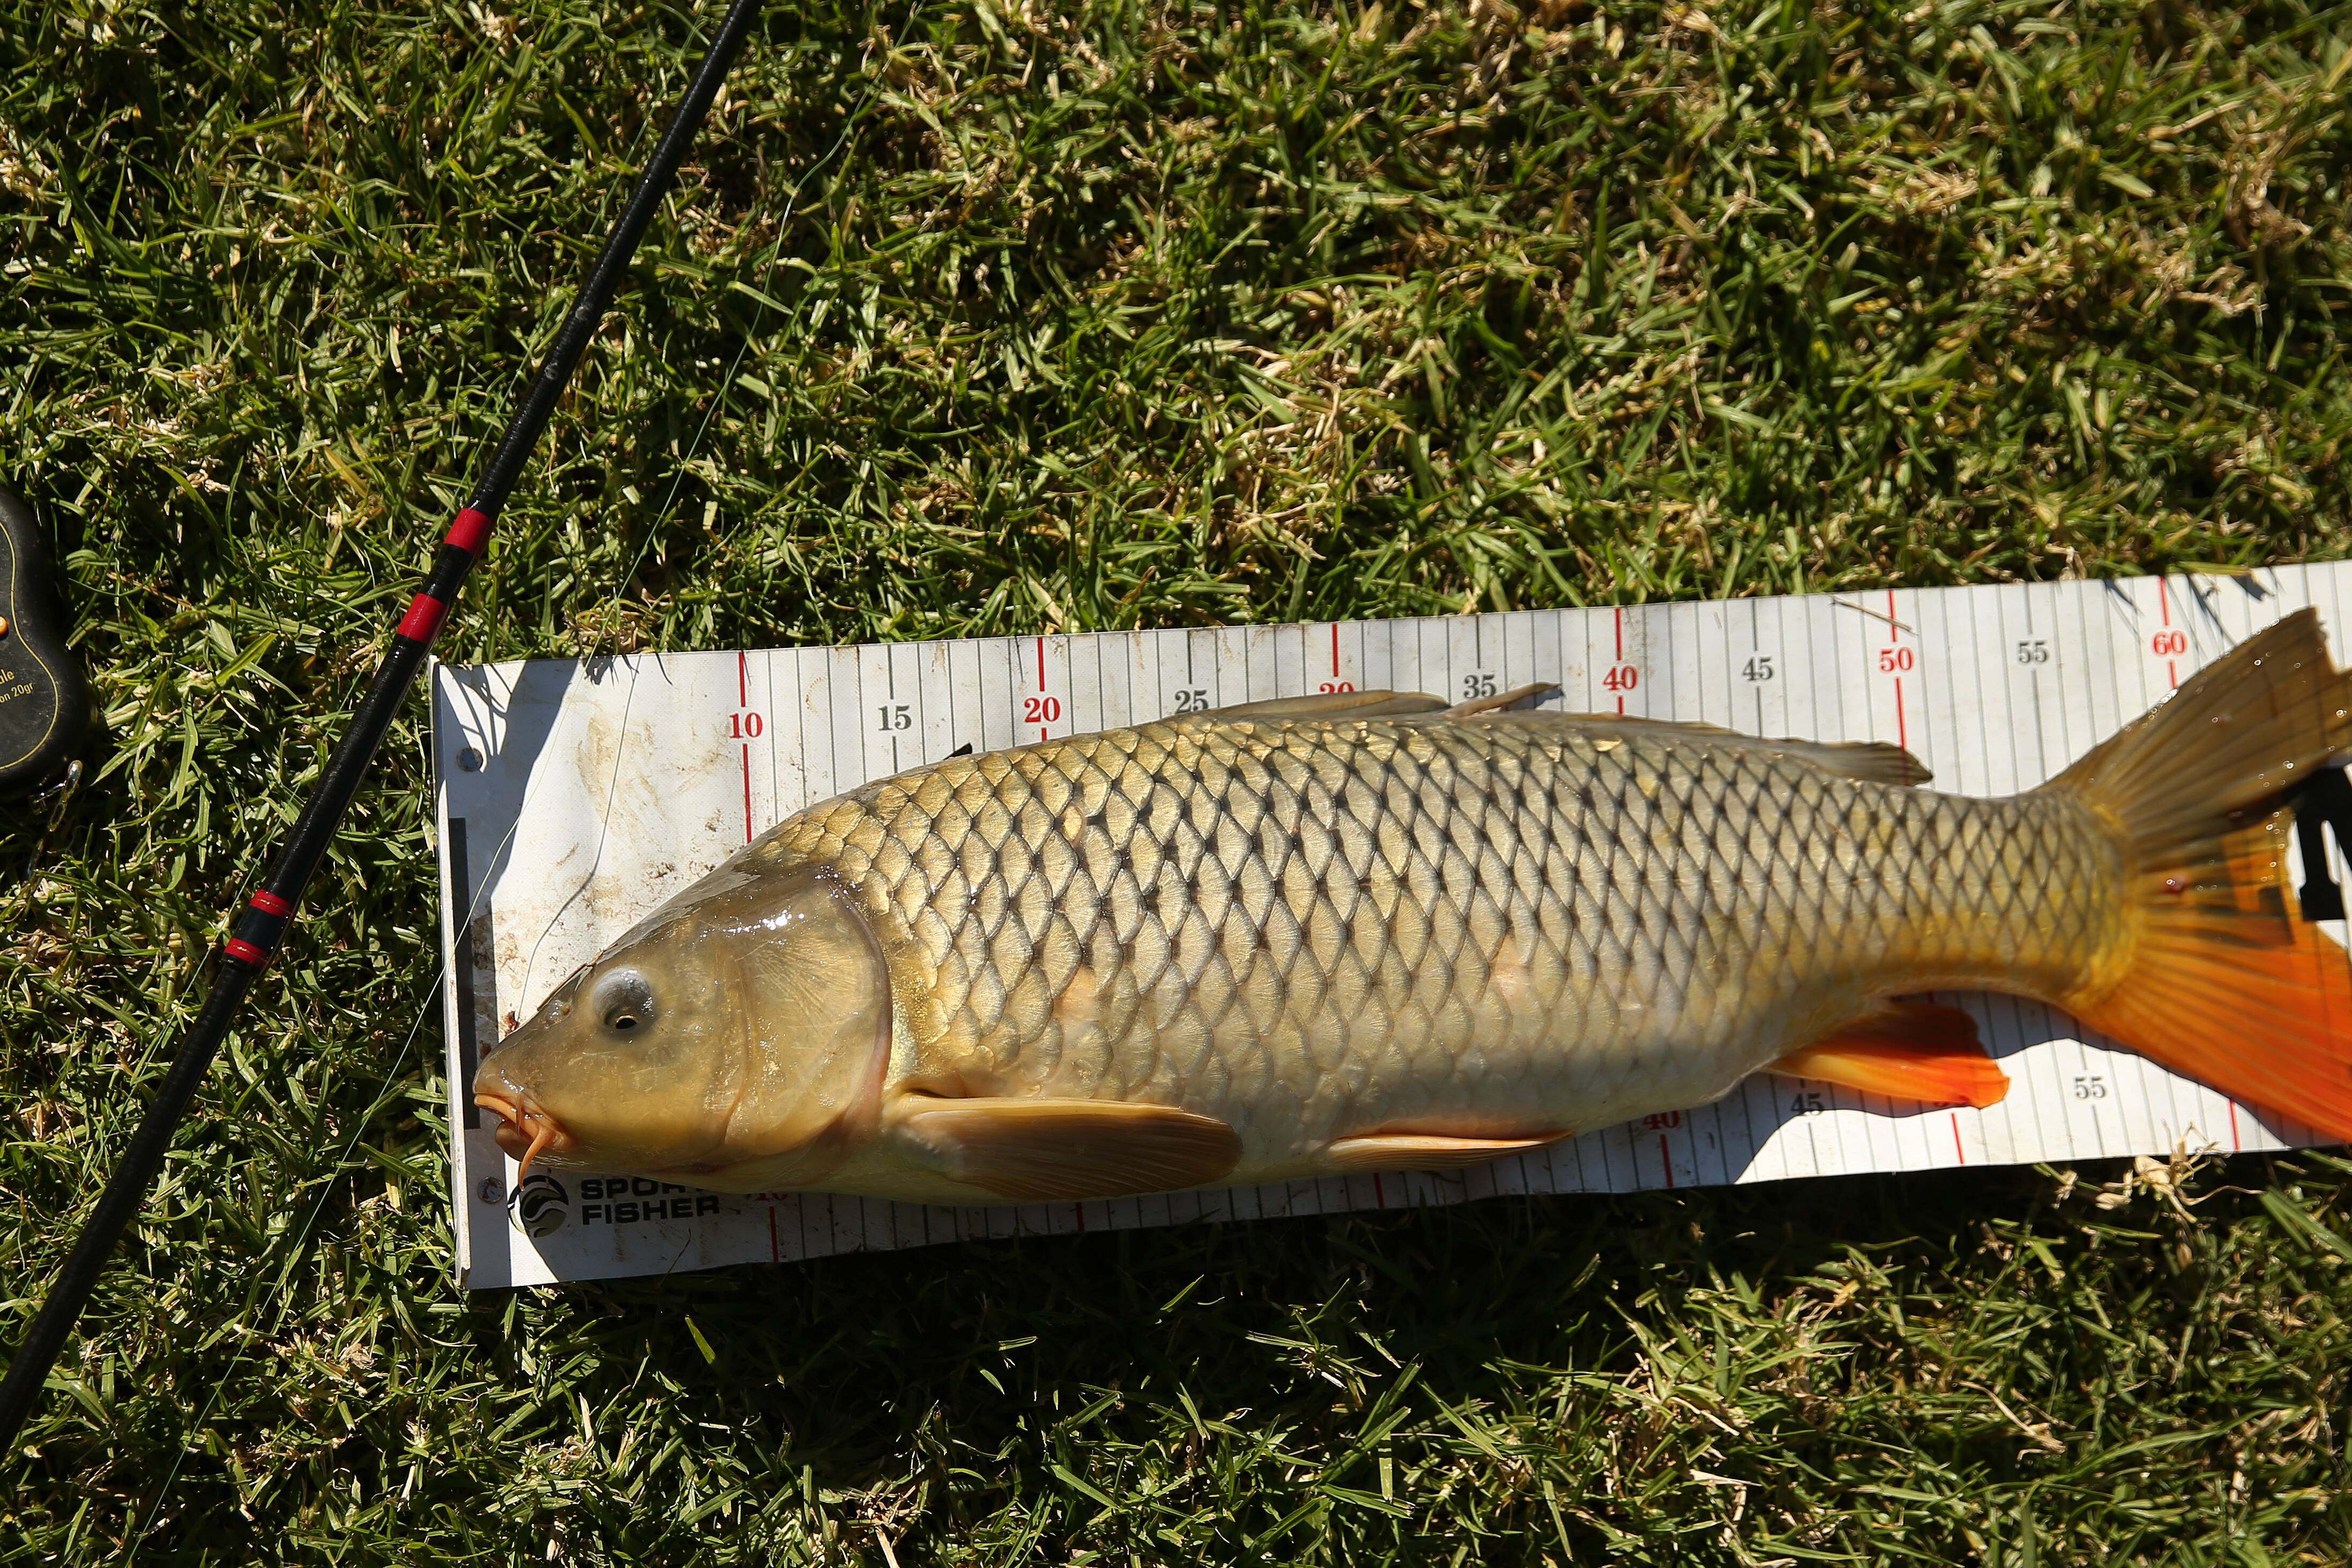 For the love of carp: Carp fishing enthusiast speaks out over